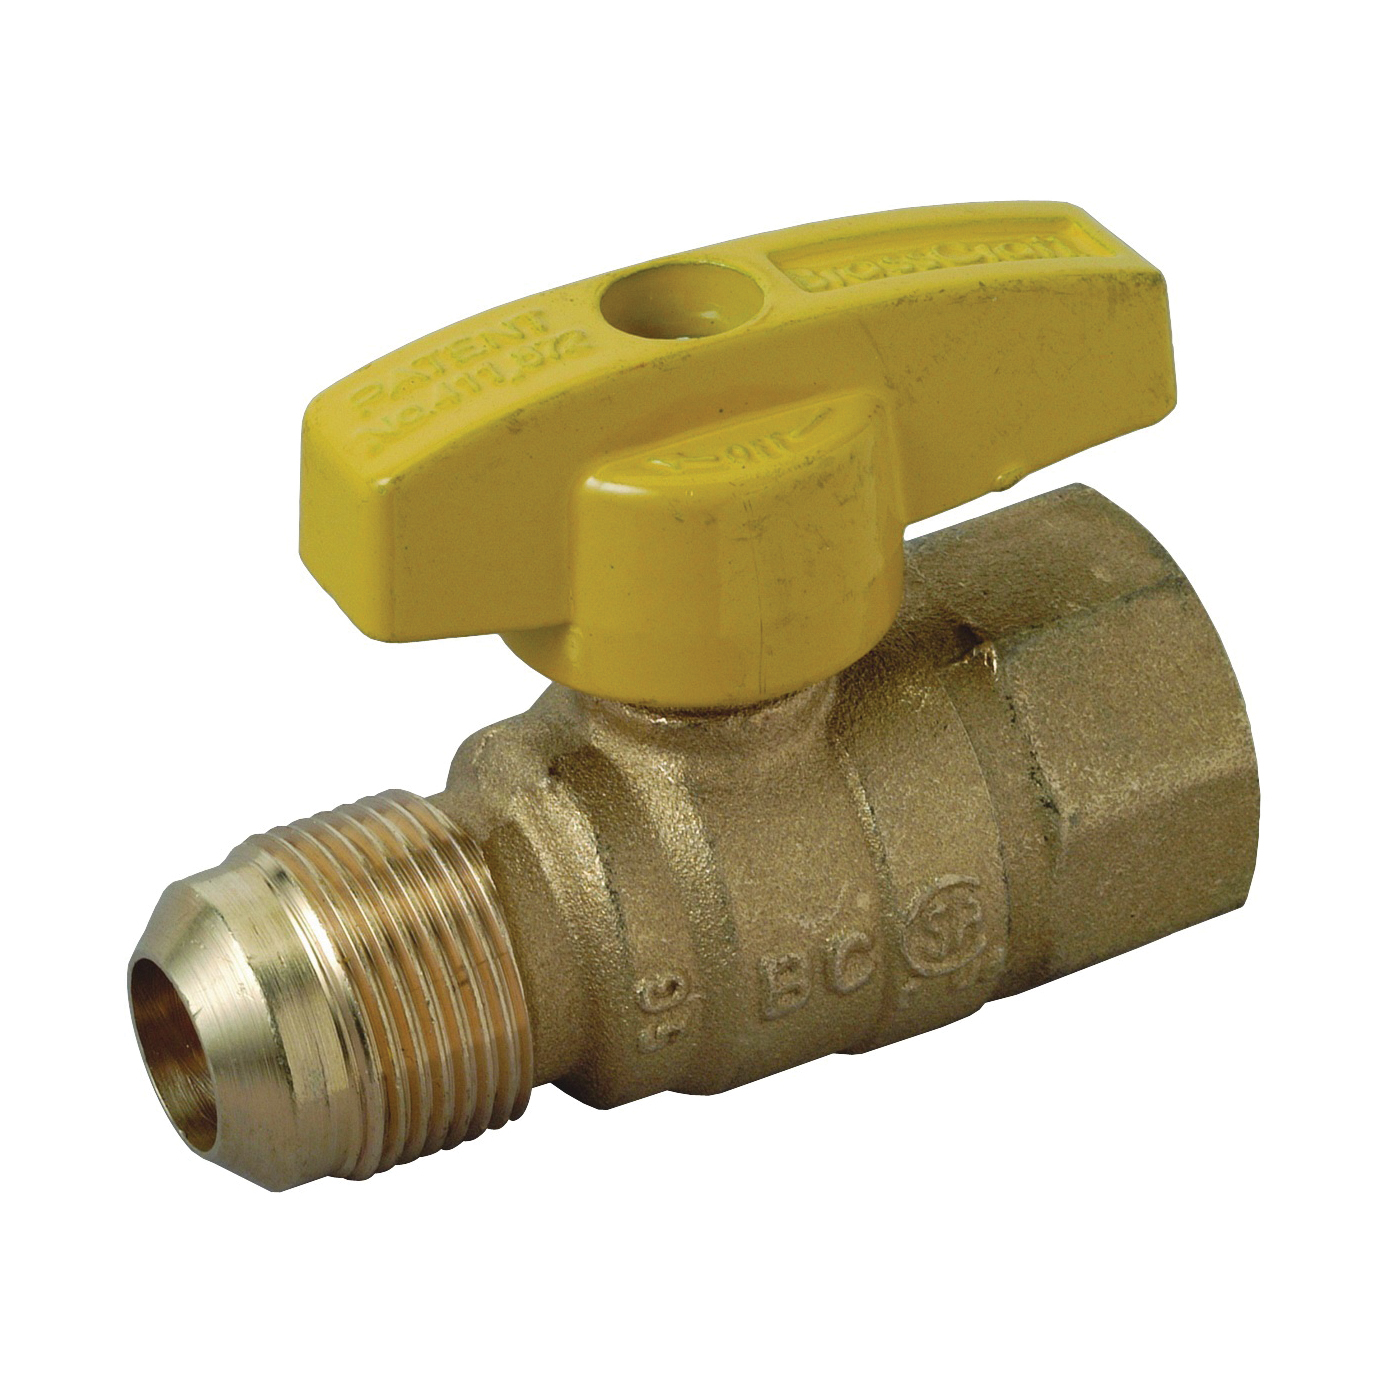 PSSC-60 Gas Ball Valve, 5/8 x 3/4 in Connection, Flared x FIP, 5 psi Pressure, Brass Body